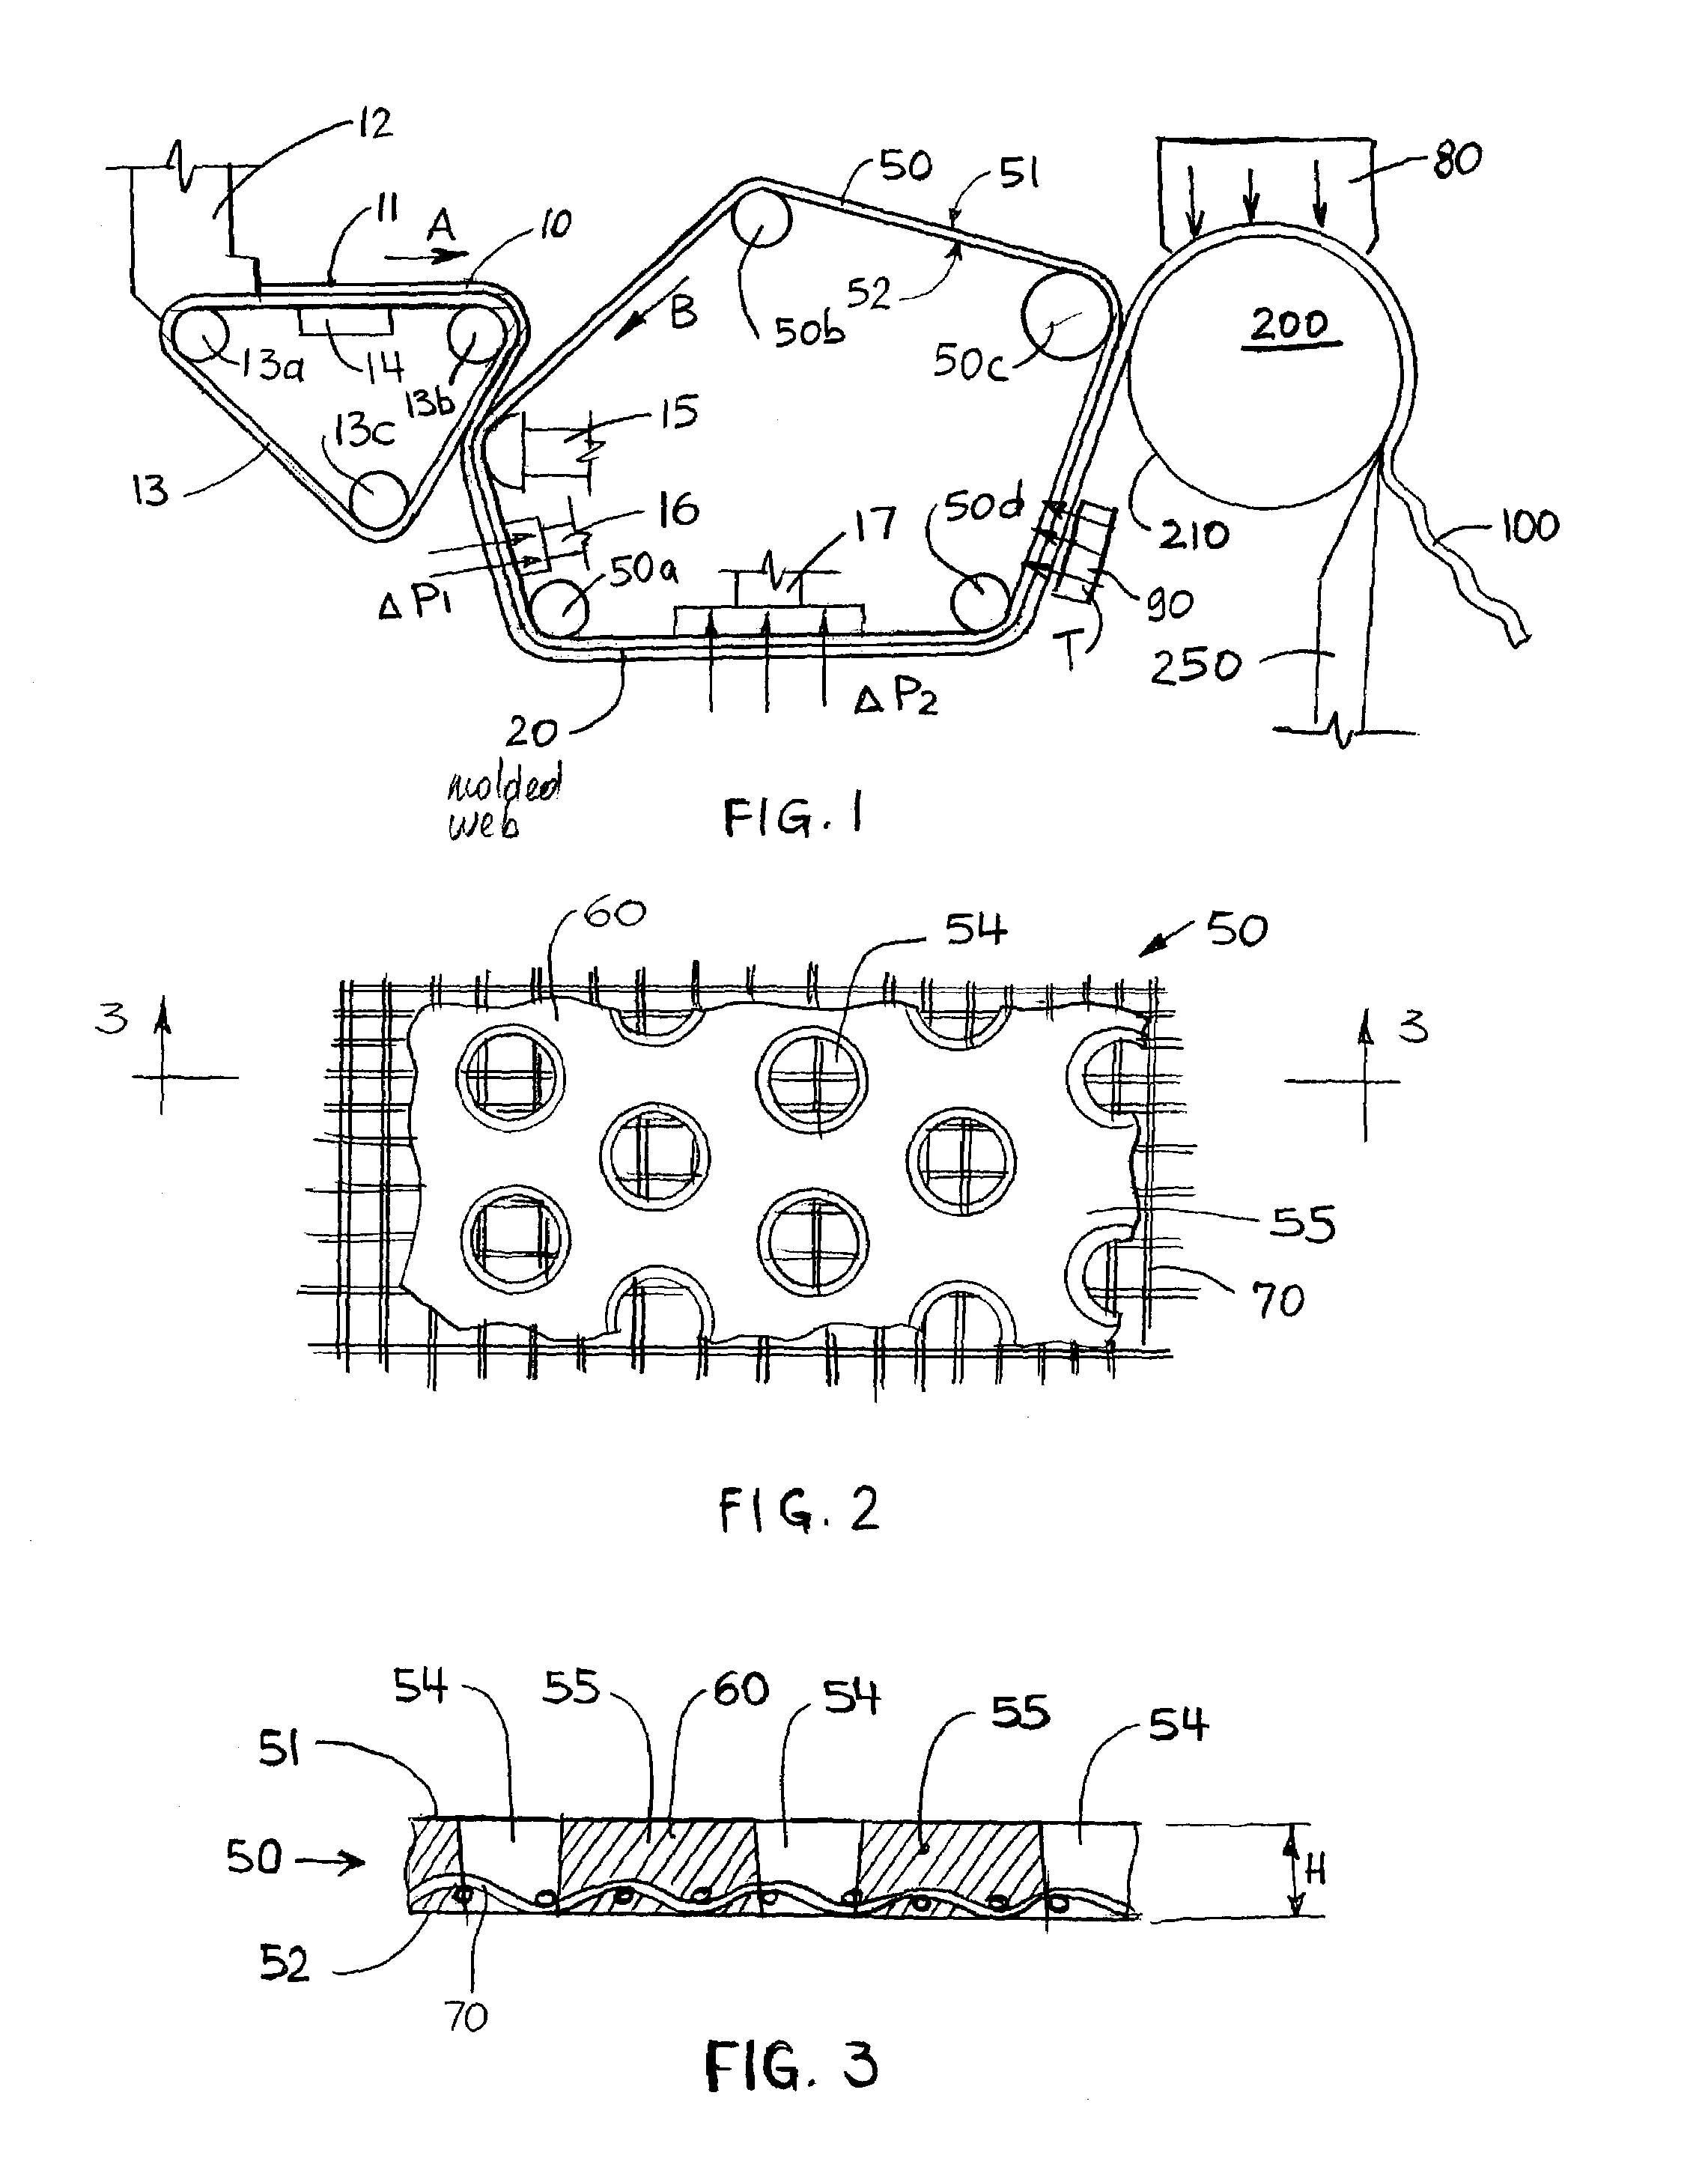 Process for making unitary fibrous structure comprising randomly distributed cellulosic fibers and non-randomly distributed synthetic fibers